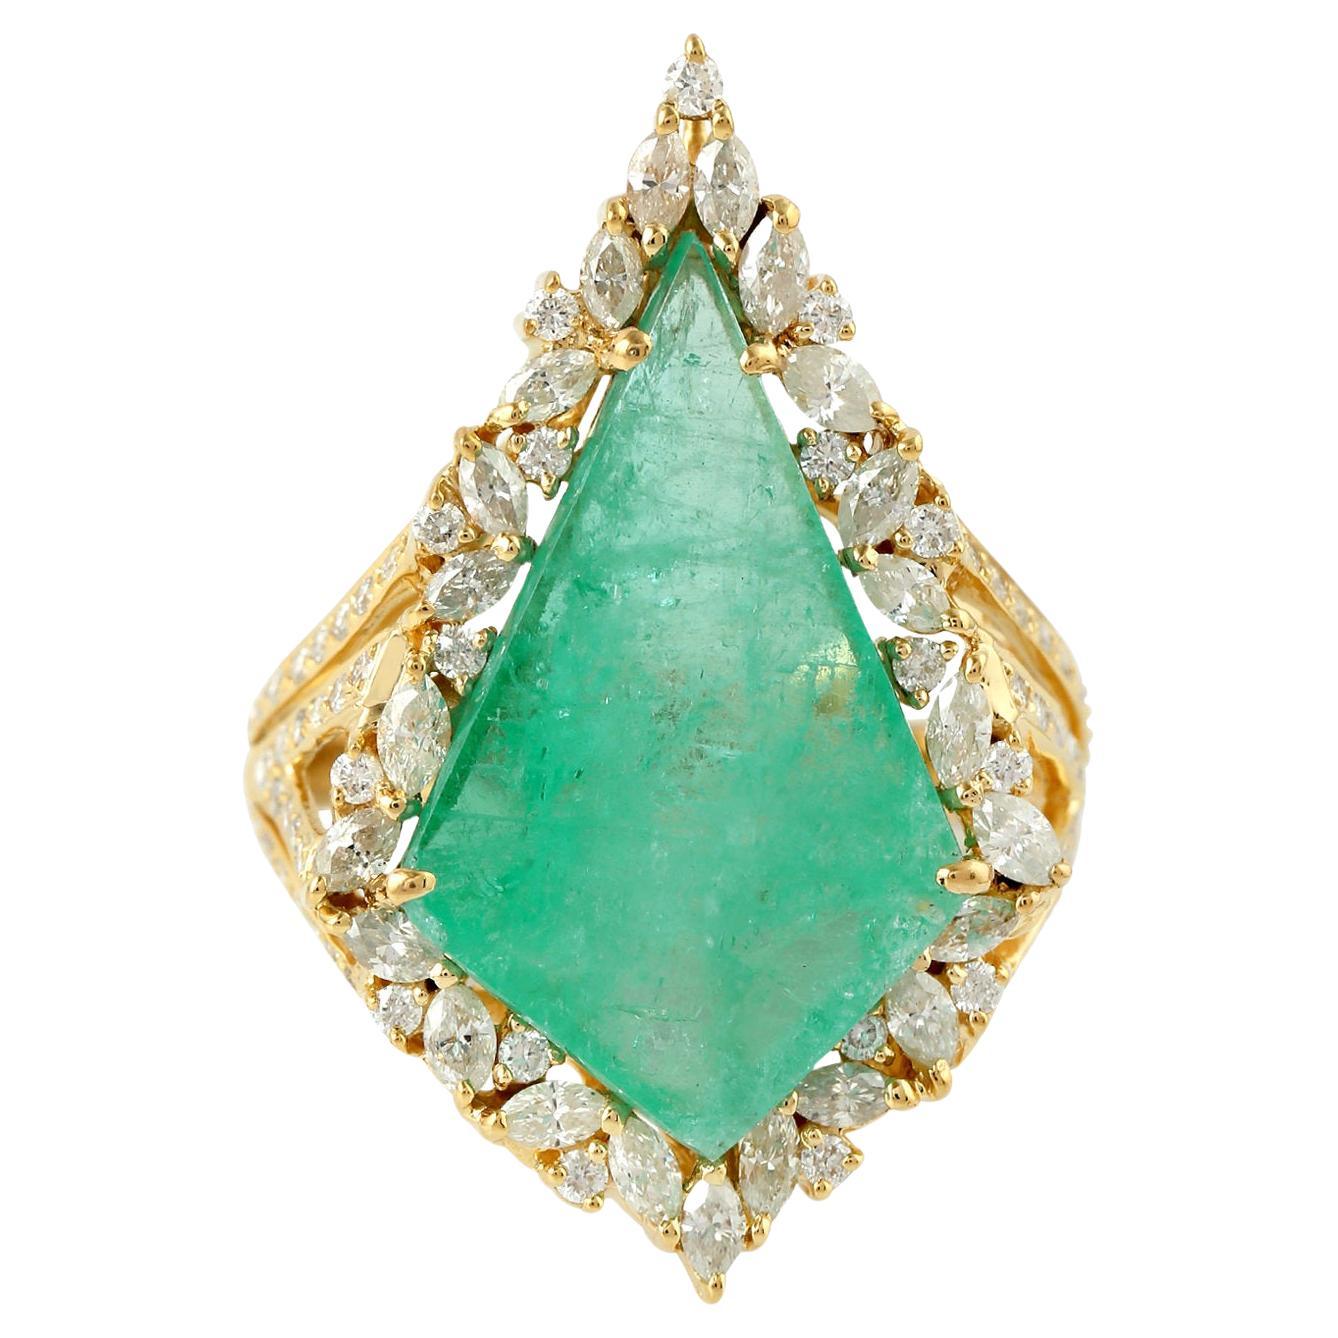 Rhombus Shaped Emerald cocktail Ring With Diamonds Made In 18k yellow Gold For Sale